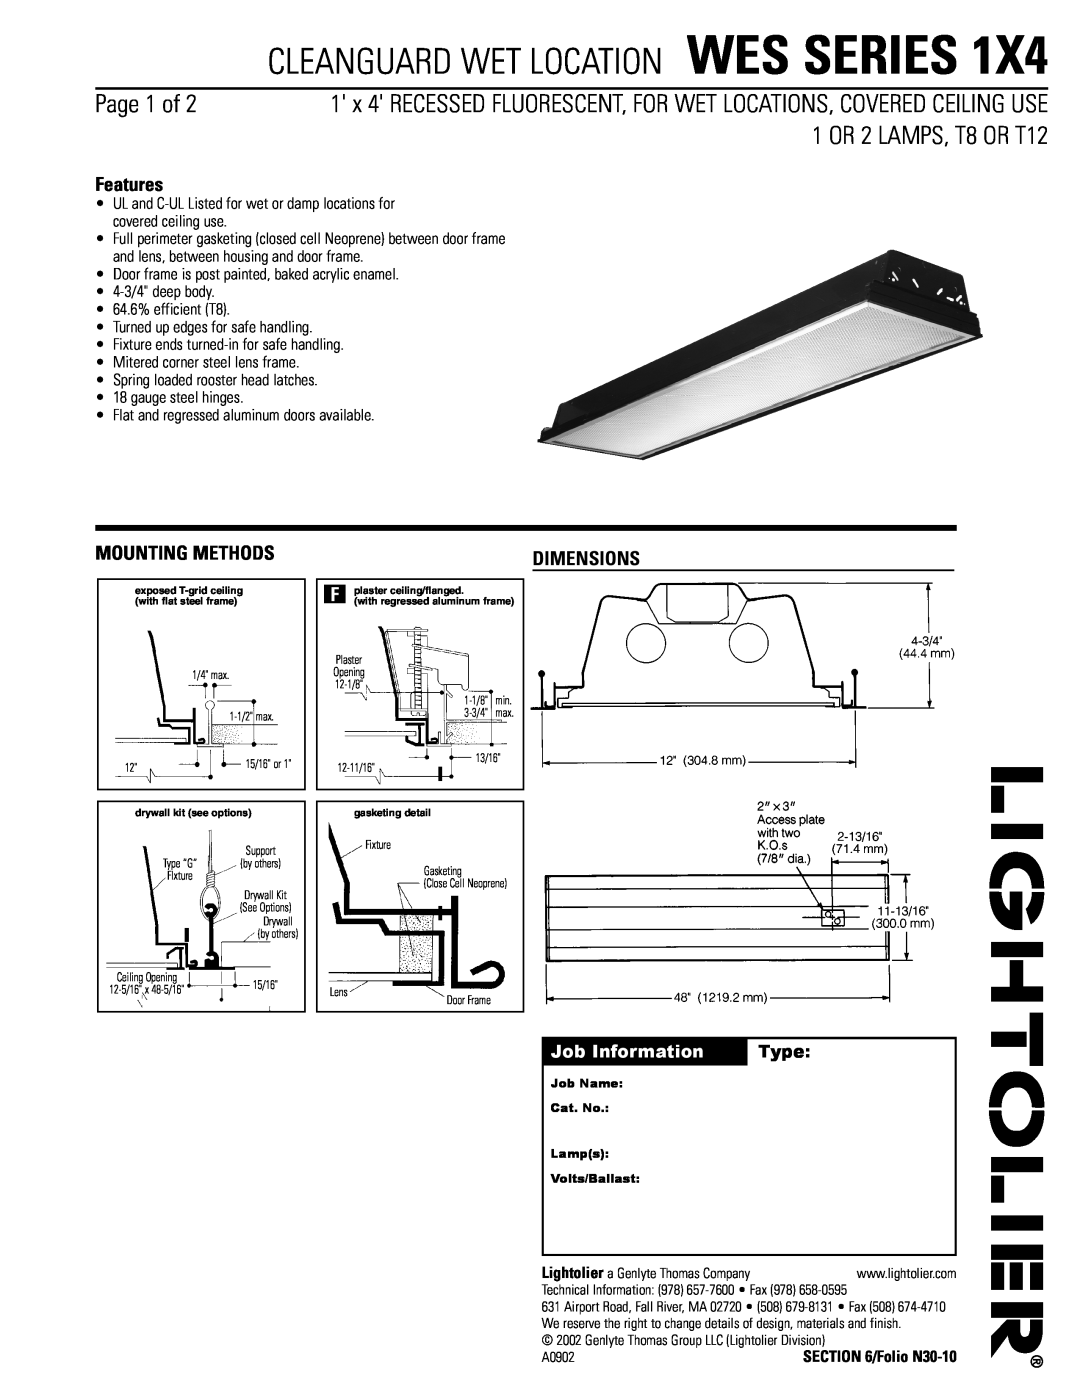 Lightolier WES SERIES 1X4 dimensions Cleanguard Wet Location Wes Series, Page 1 of, 1 OR 2 LAMPS, T8 OR T12, Features 